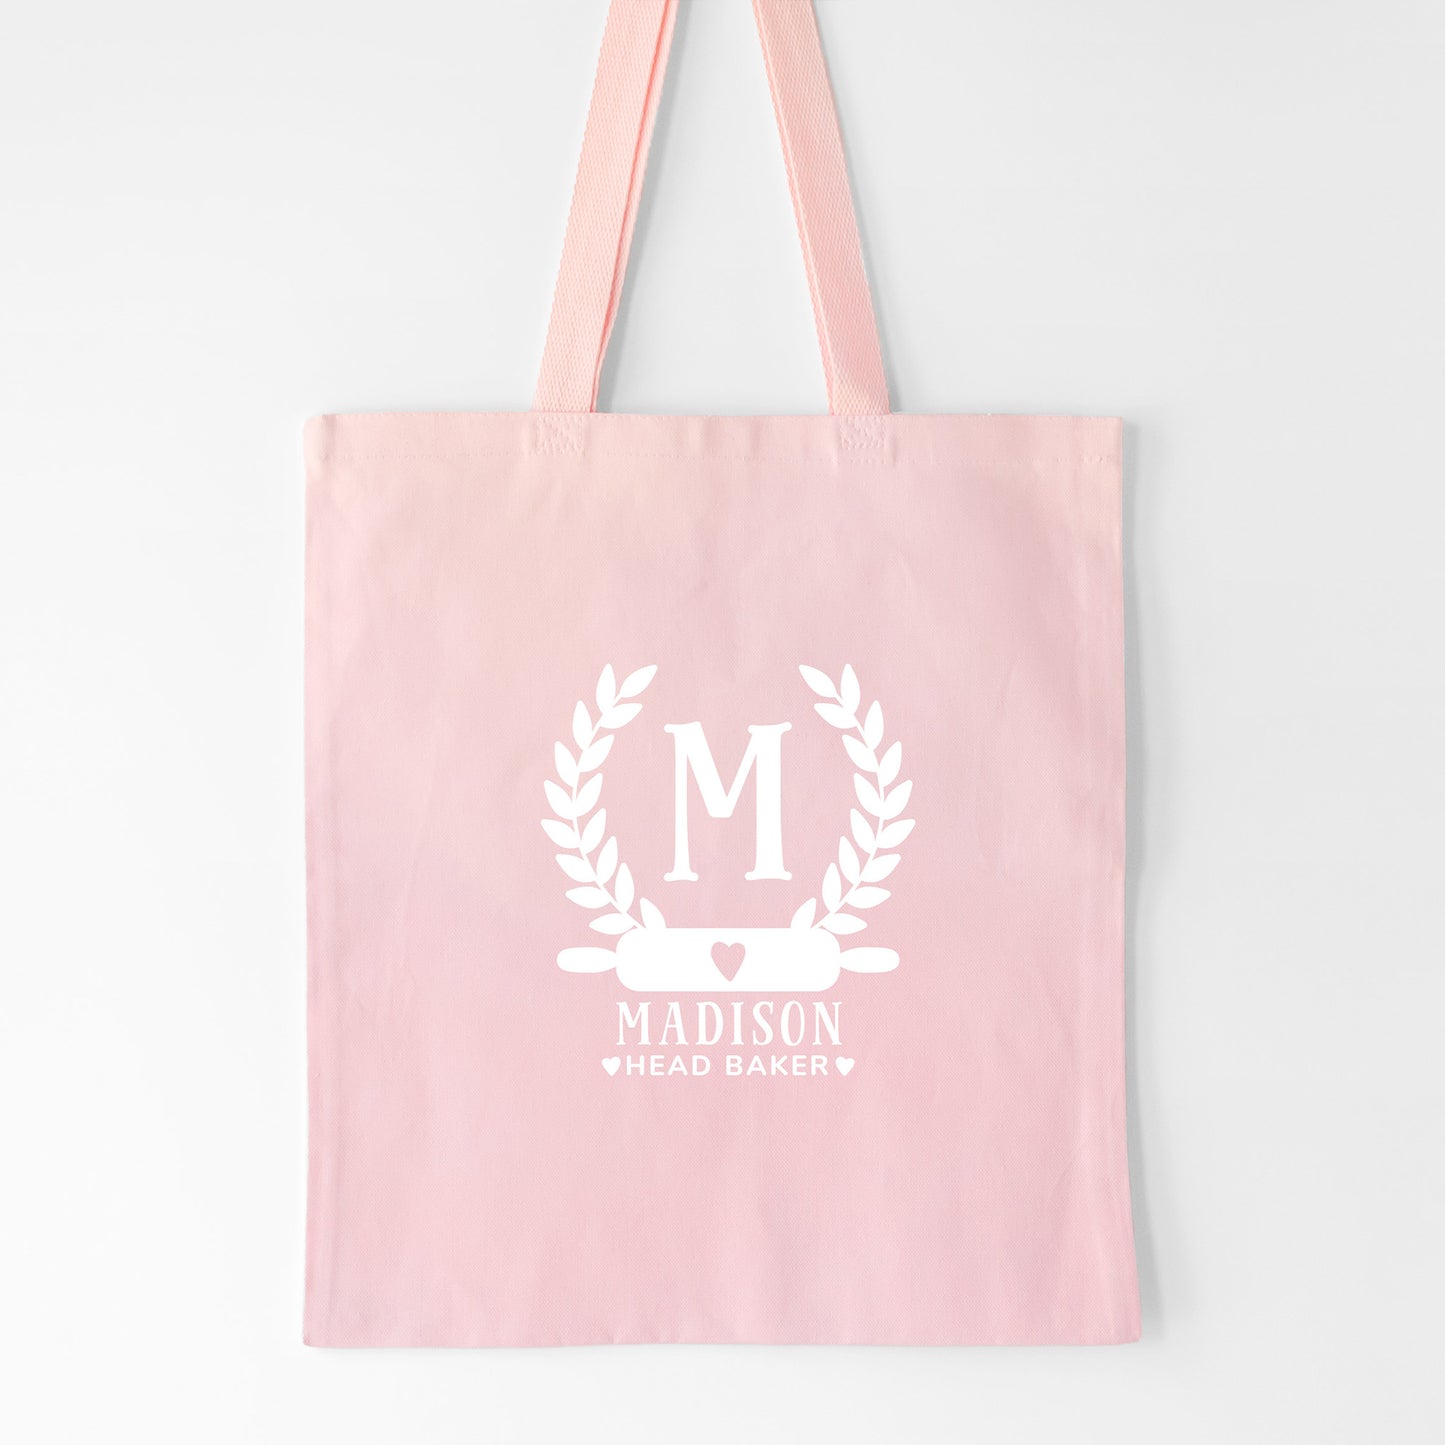 a personalized and monogrammed tote in pink pastel